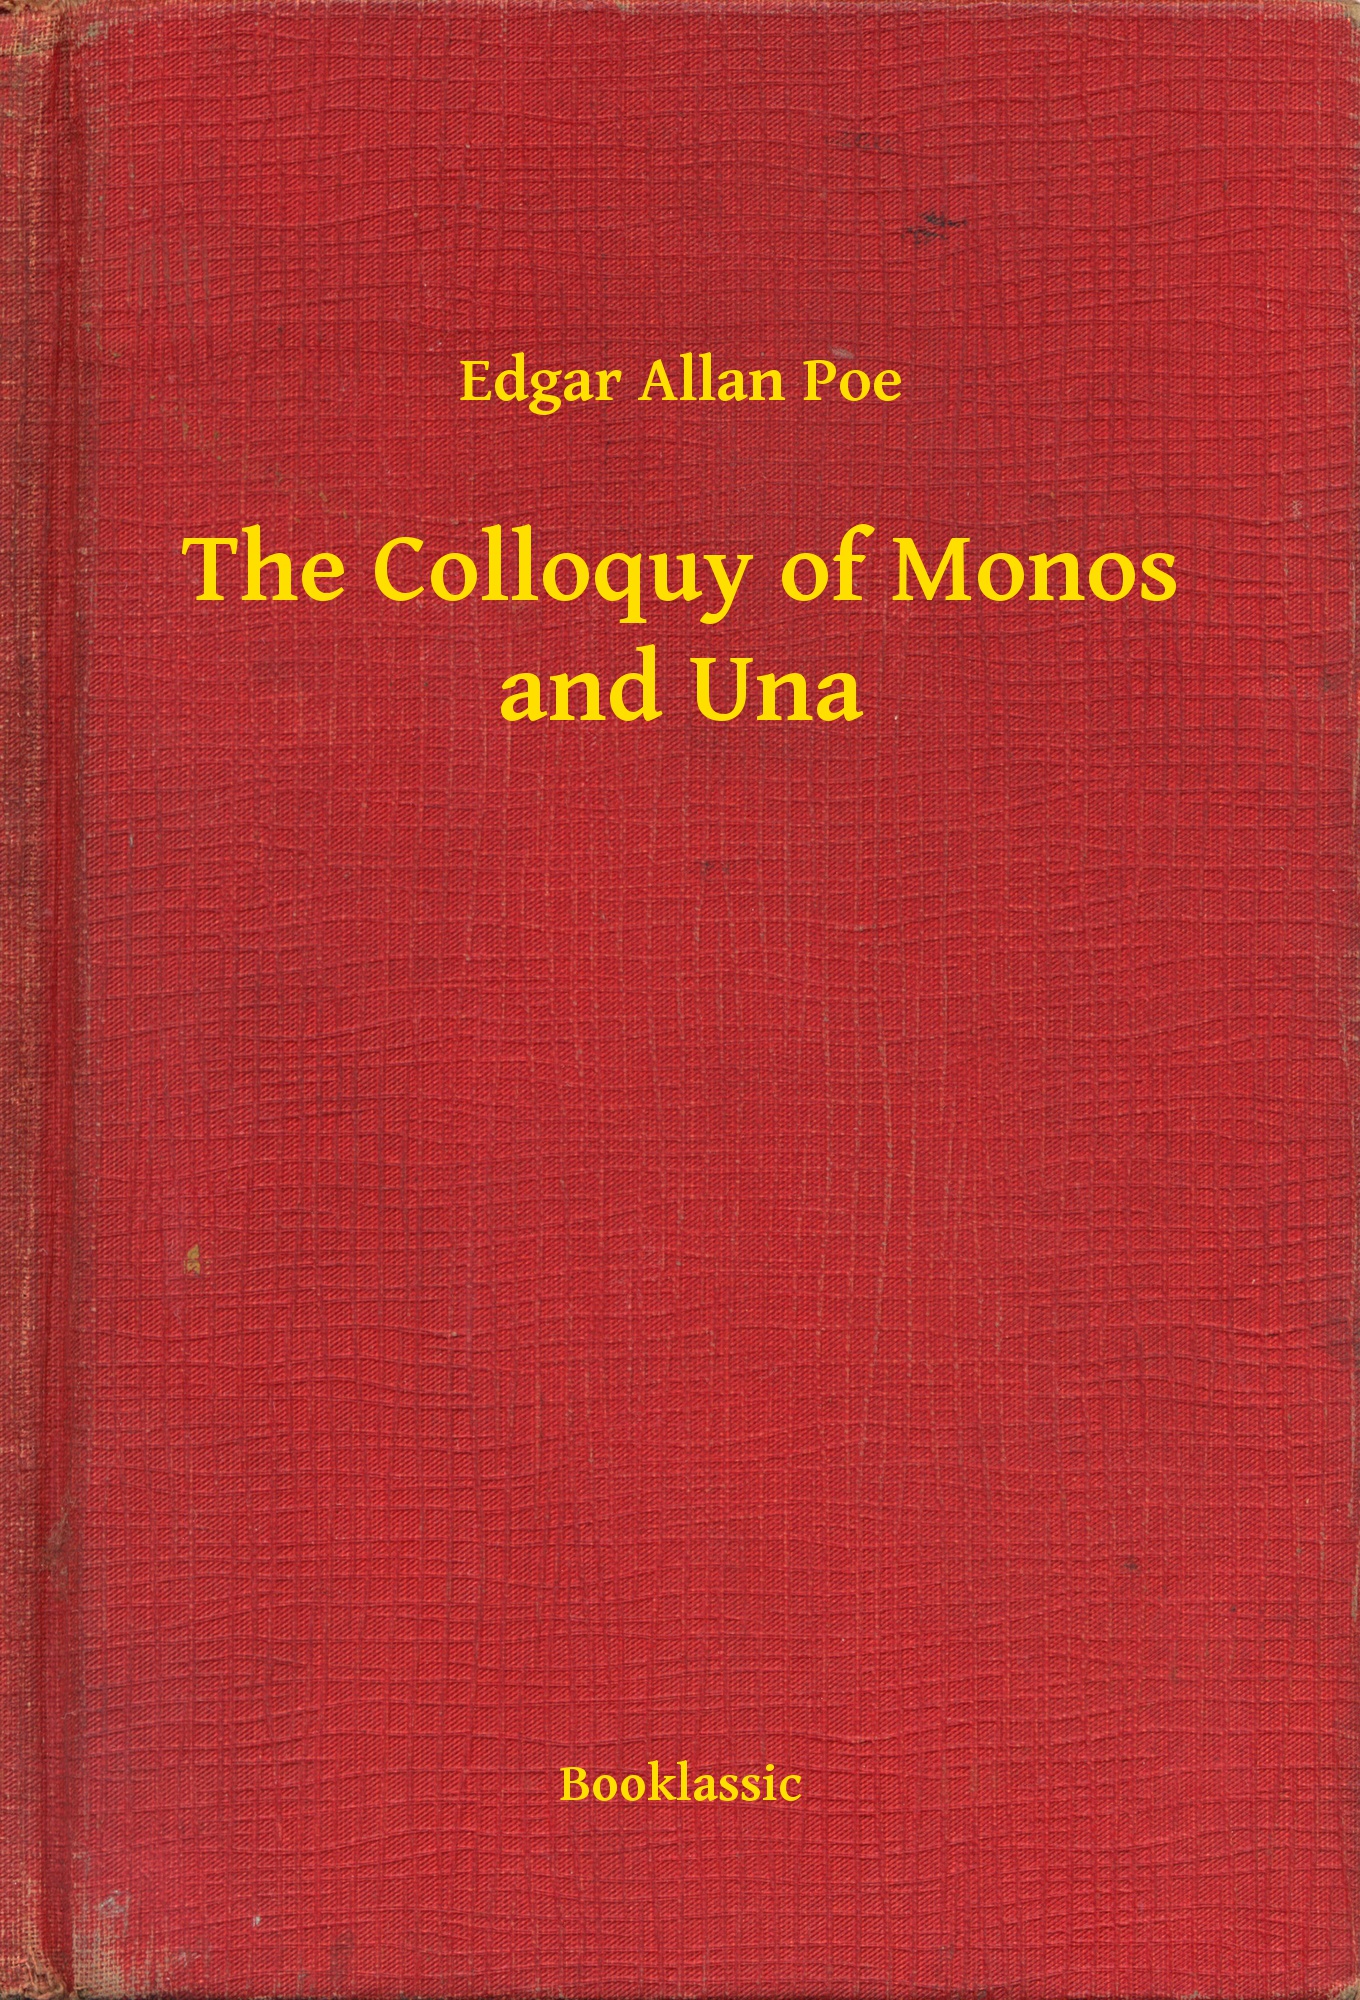 The Colloquy of Monos and Una